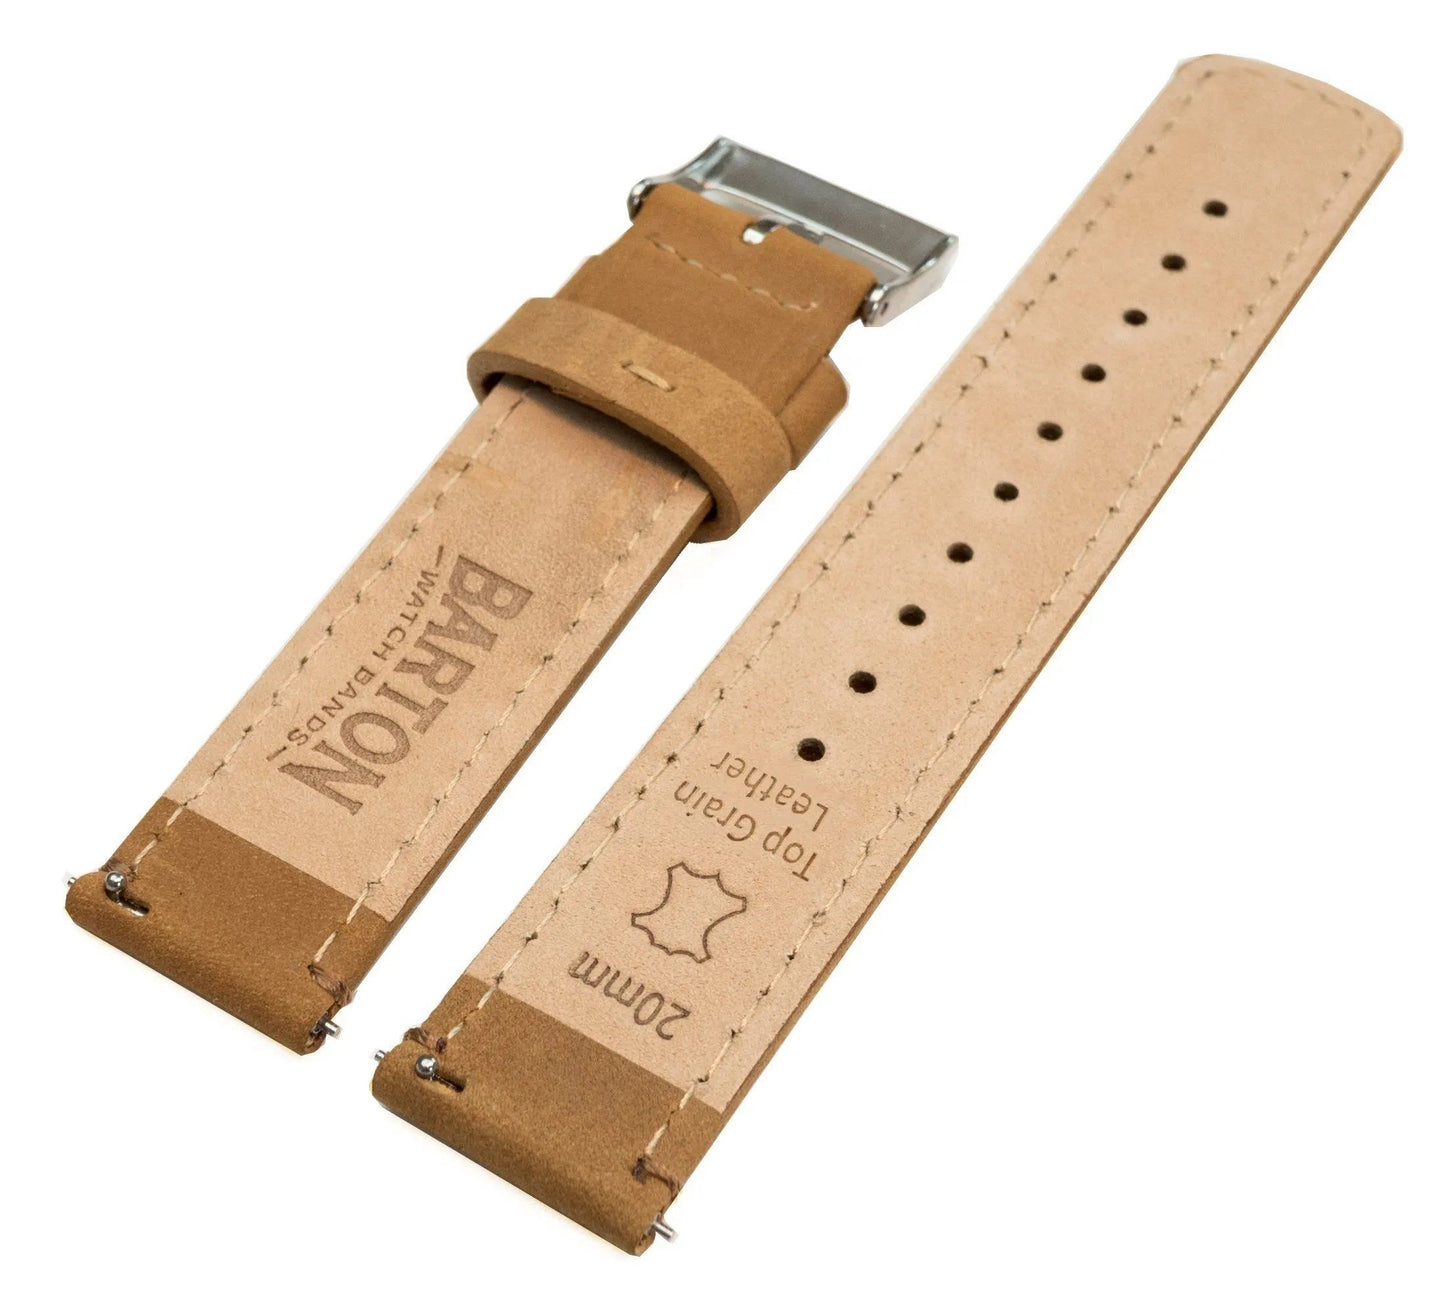 MOONSWATCH Bip | Gingerbread Brown Leather & Stitching - Barton Watch Bands